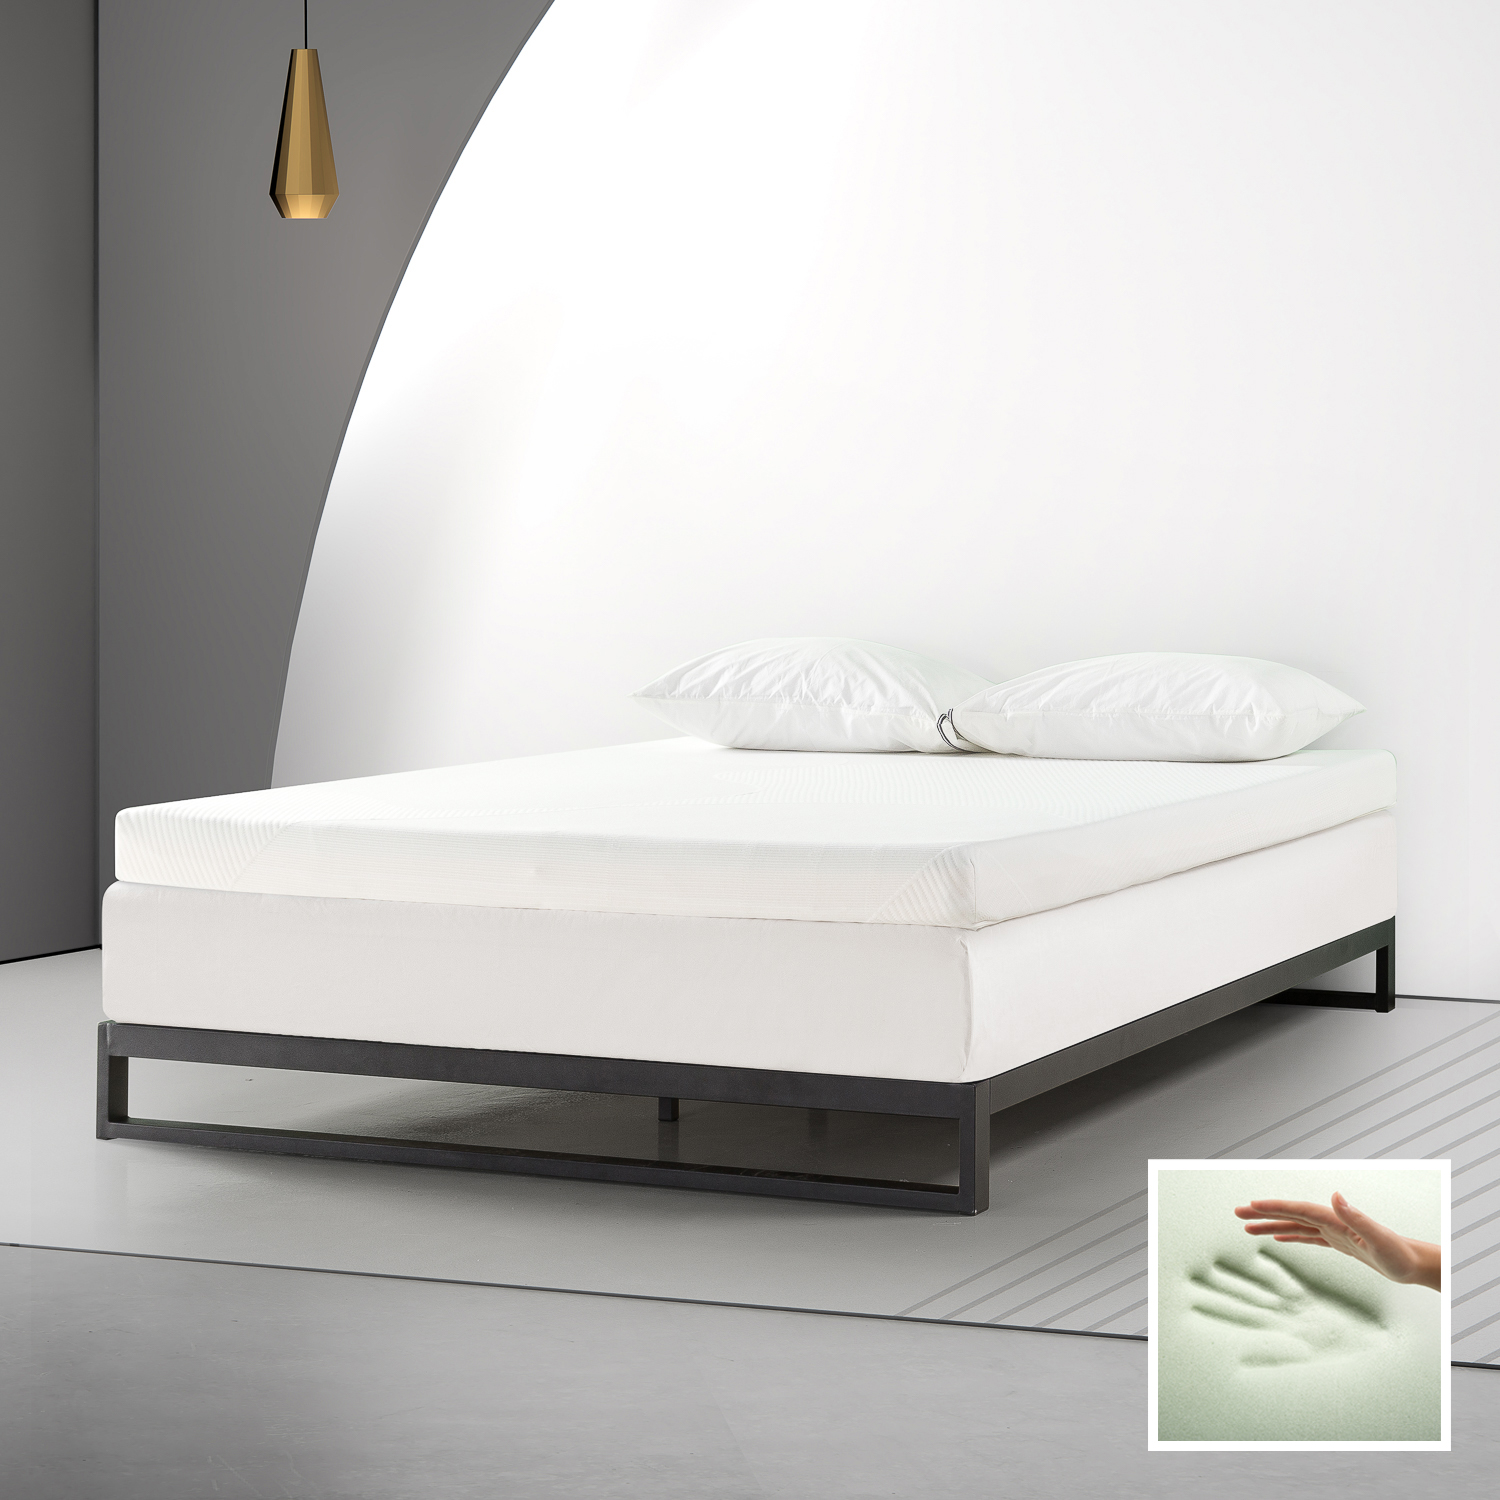 Spa Sensations By Zinus 4" Memory Foam Mattress Topper with Theratouch, Twin - image 1 of 10